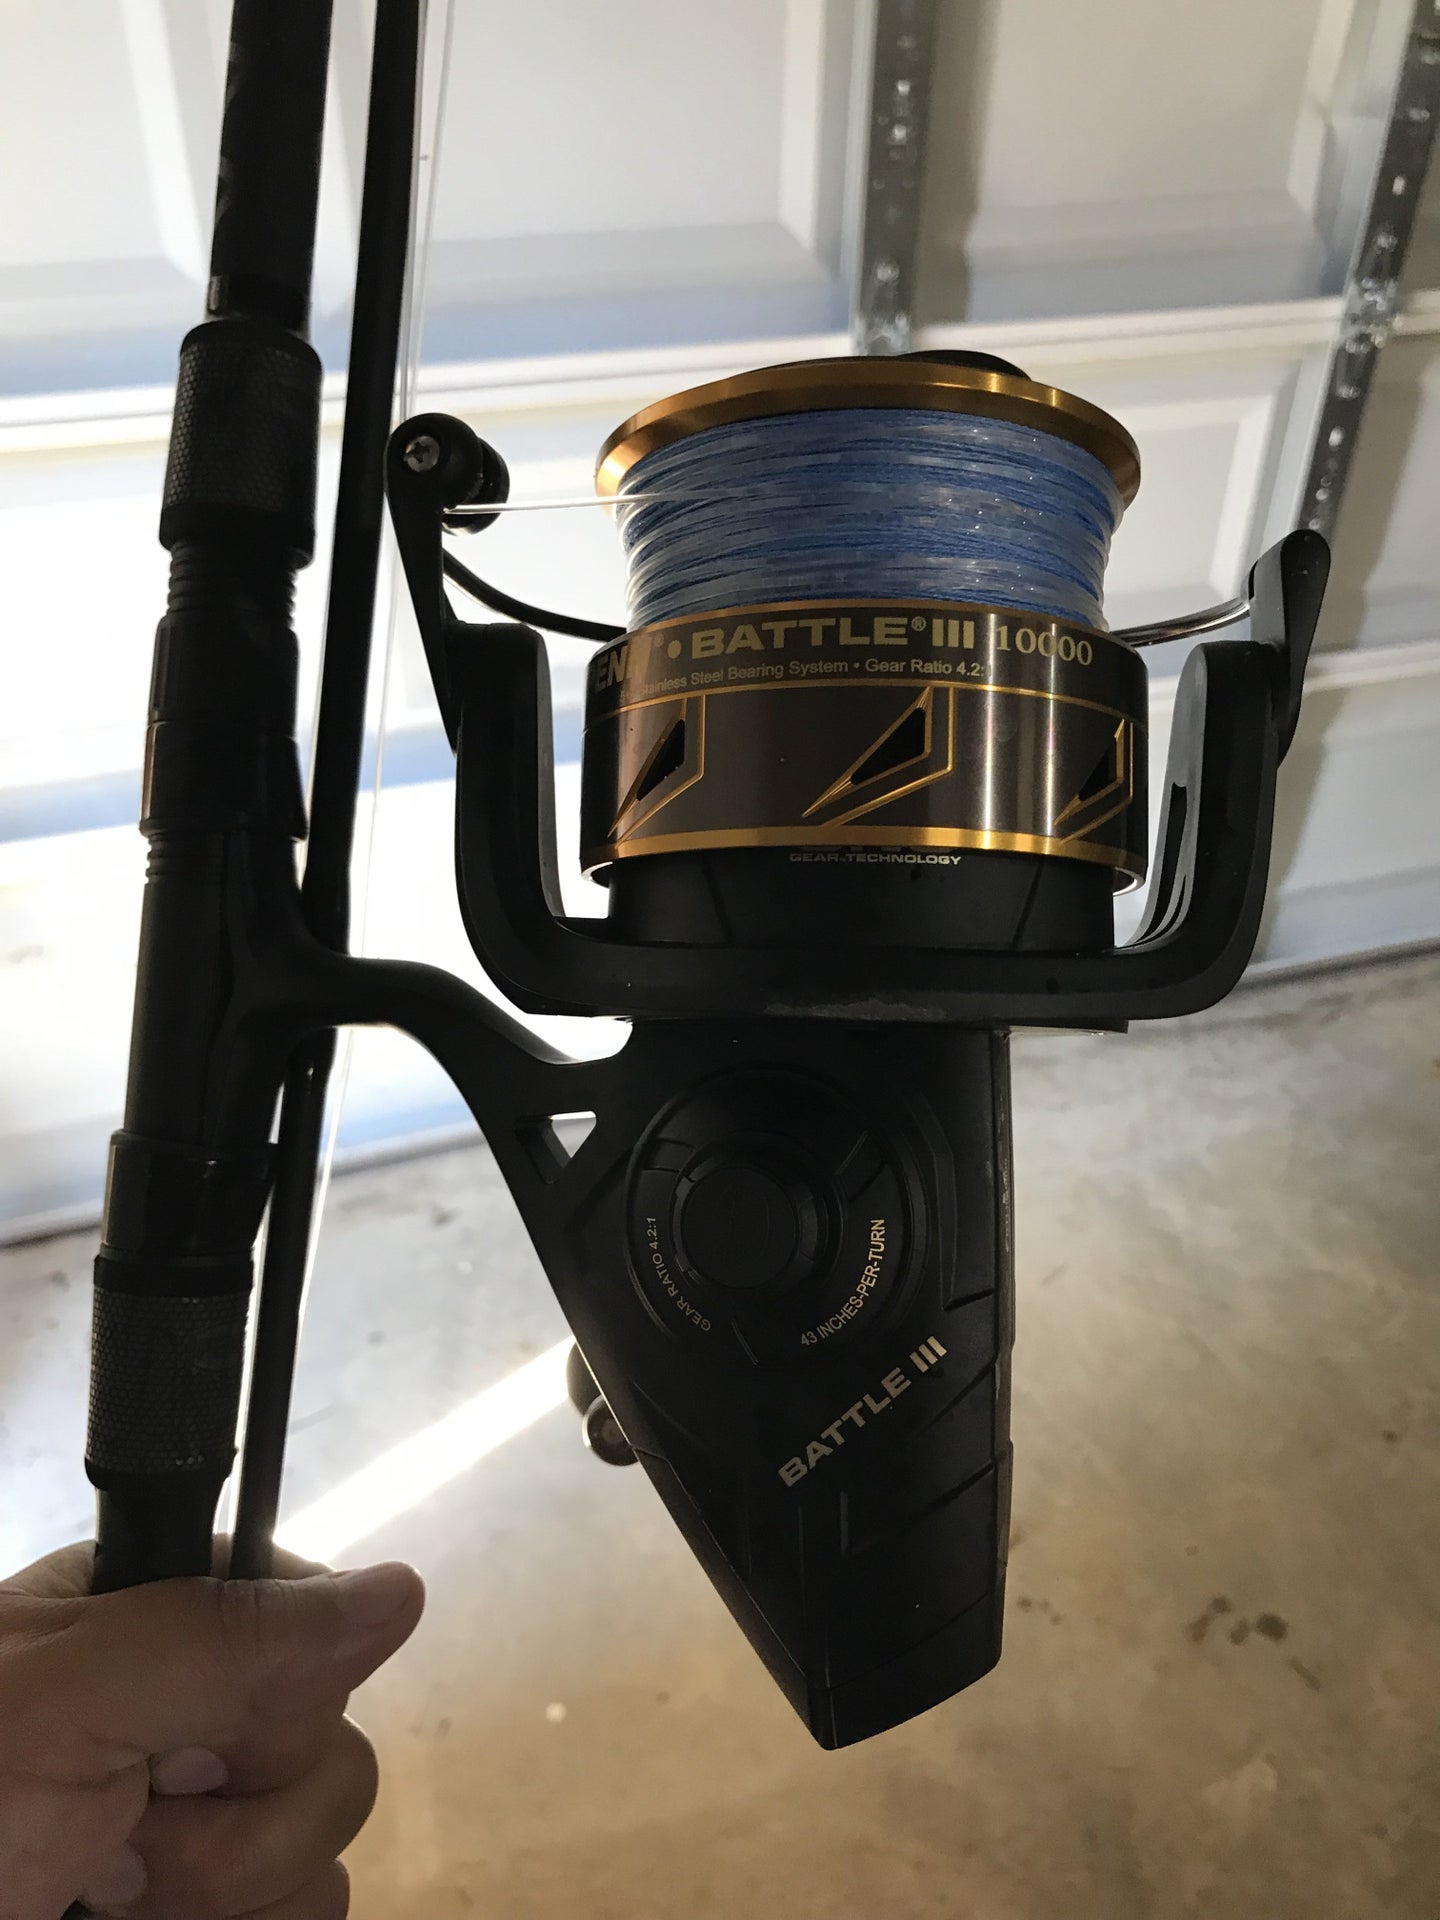 can I put a 10500 reel with 65lb braid on a Penn Carnage III 12ft